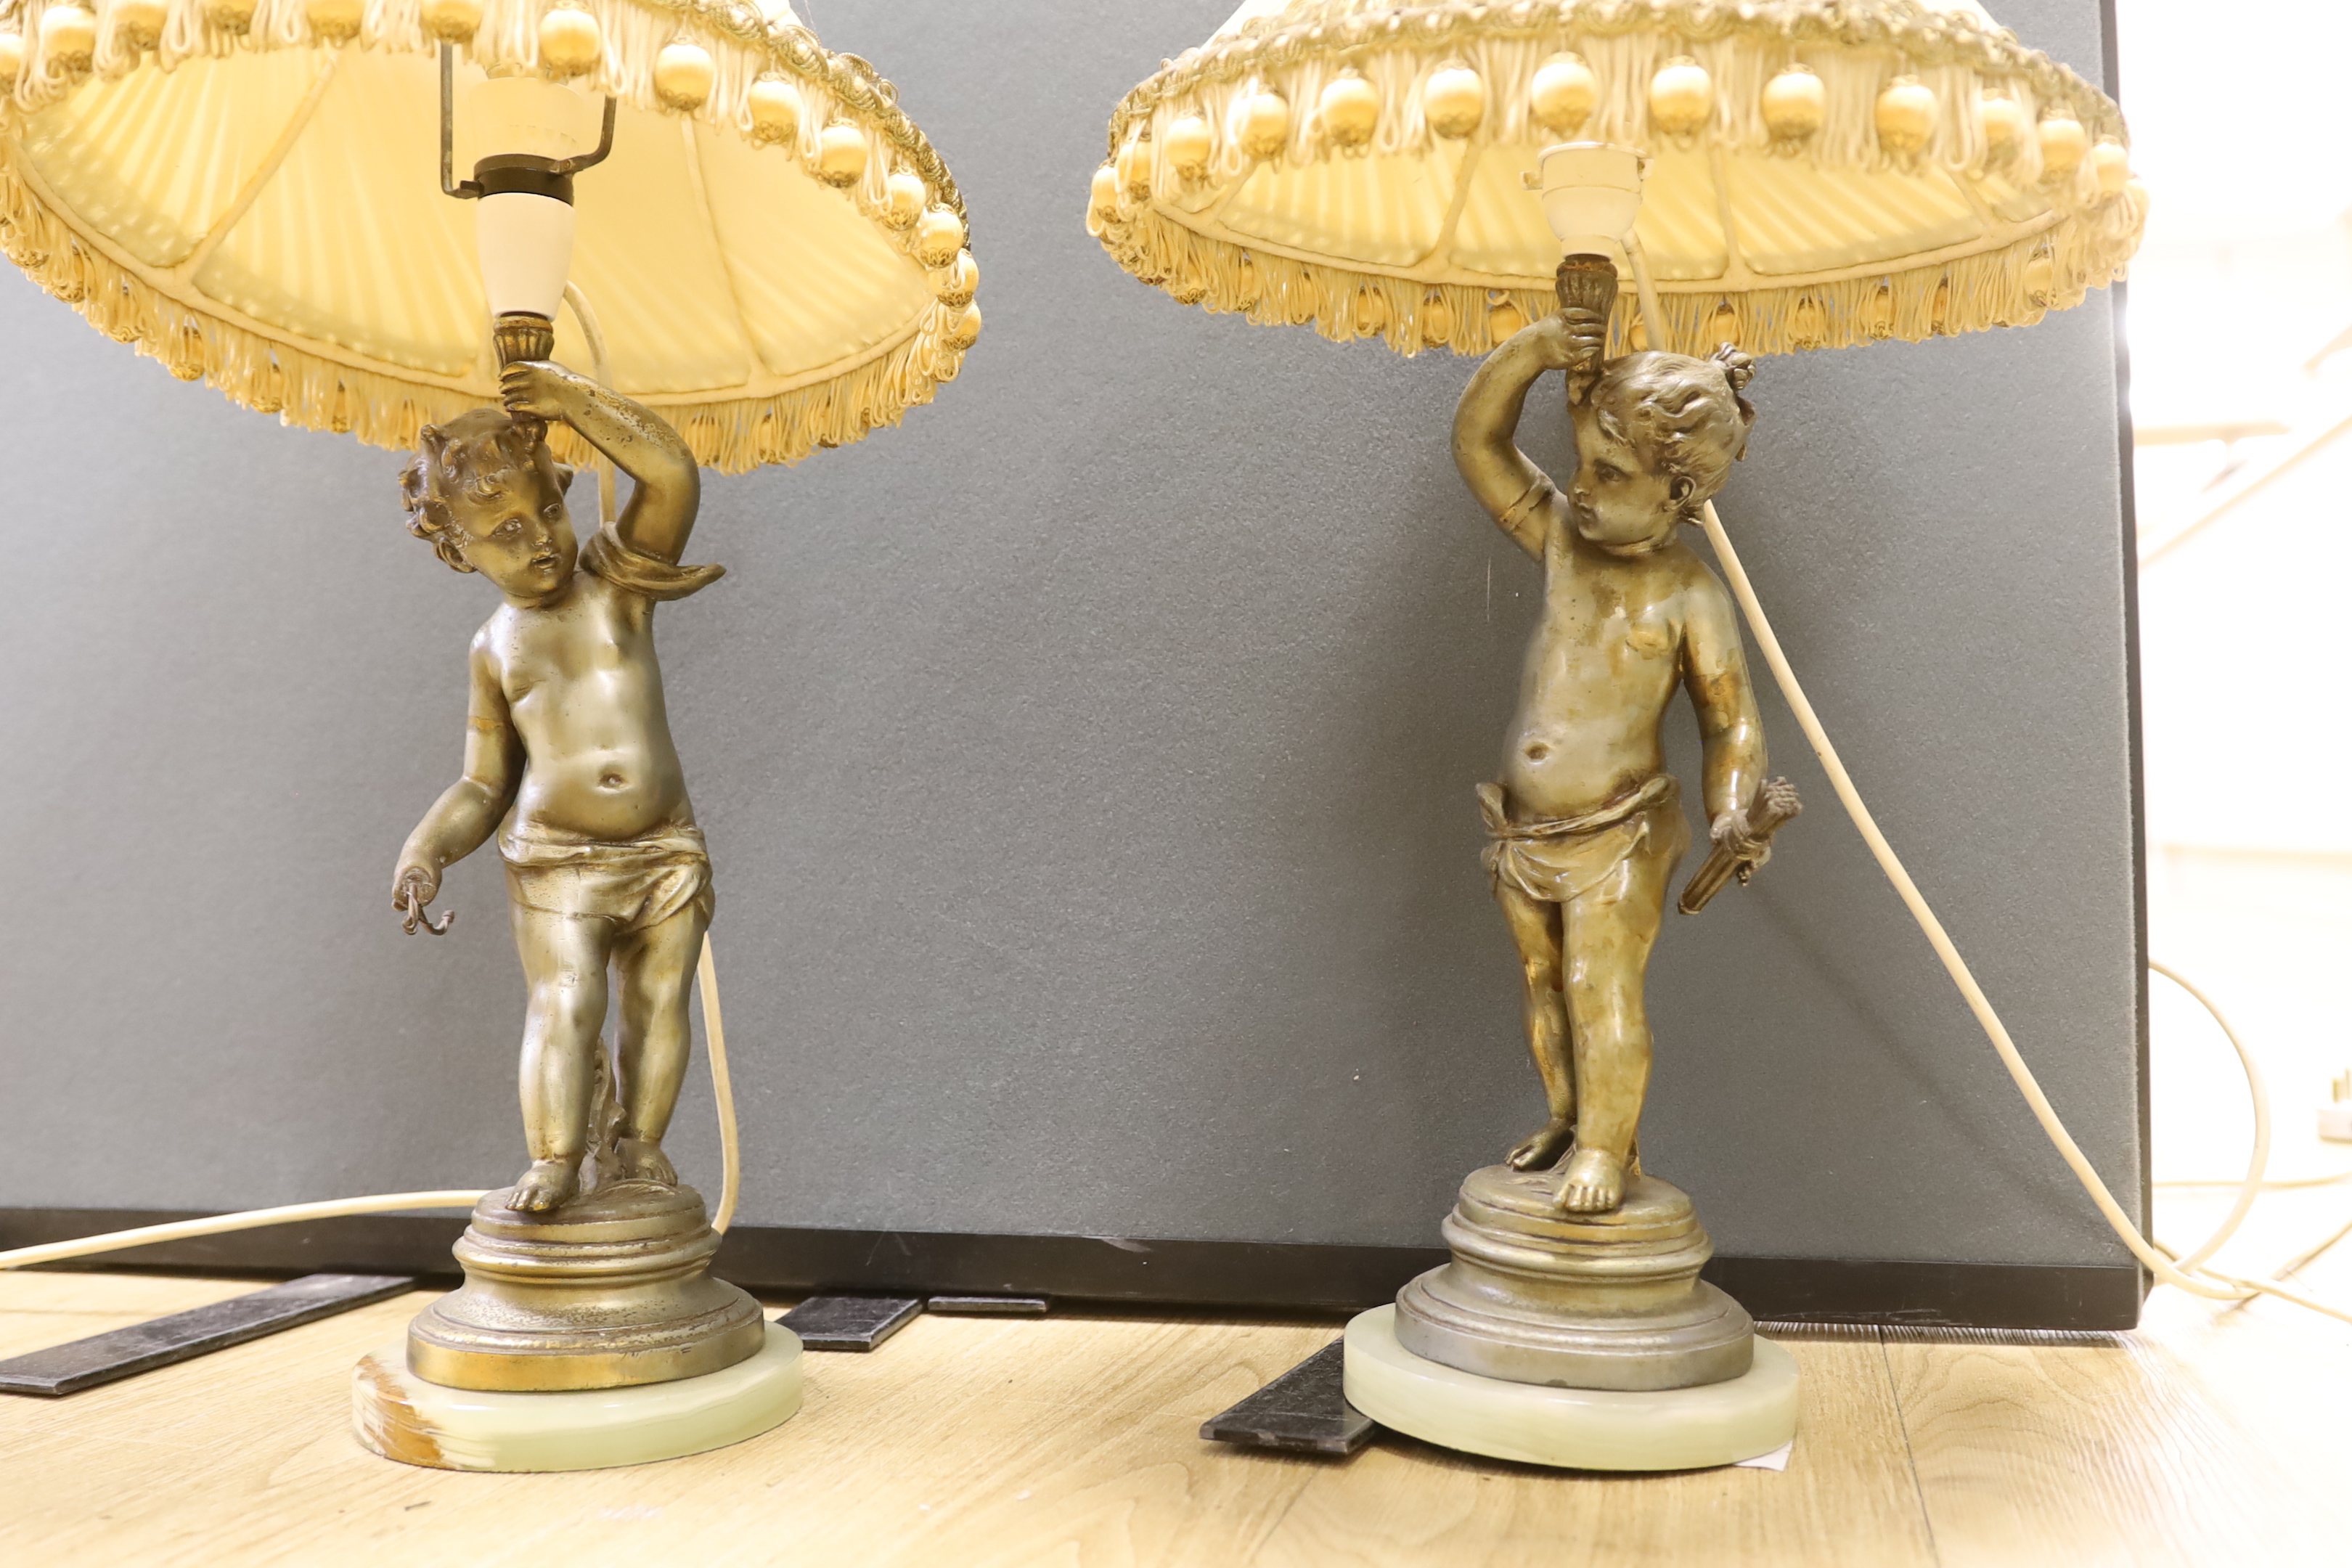 A pair of early 20th century spelter ‘cherub’ table lamps with shades, 63cm total